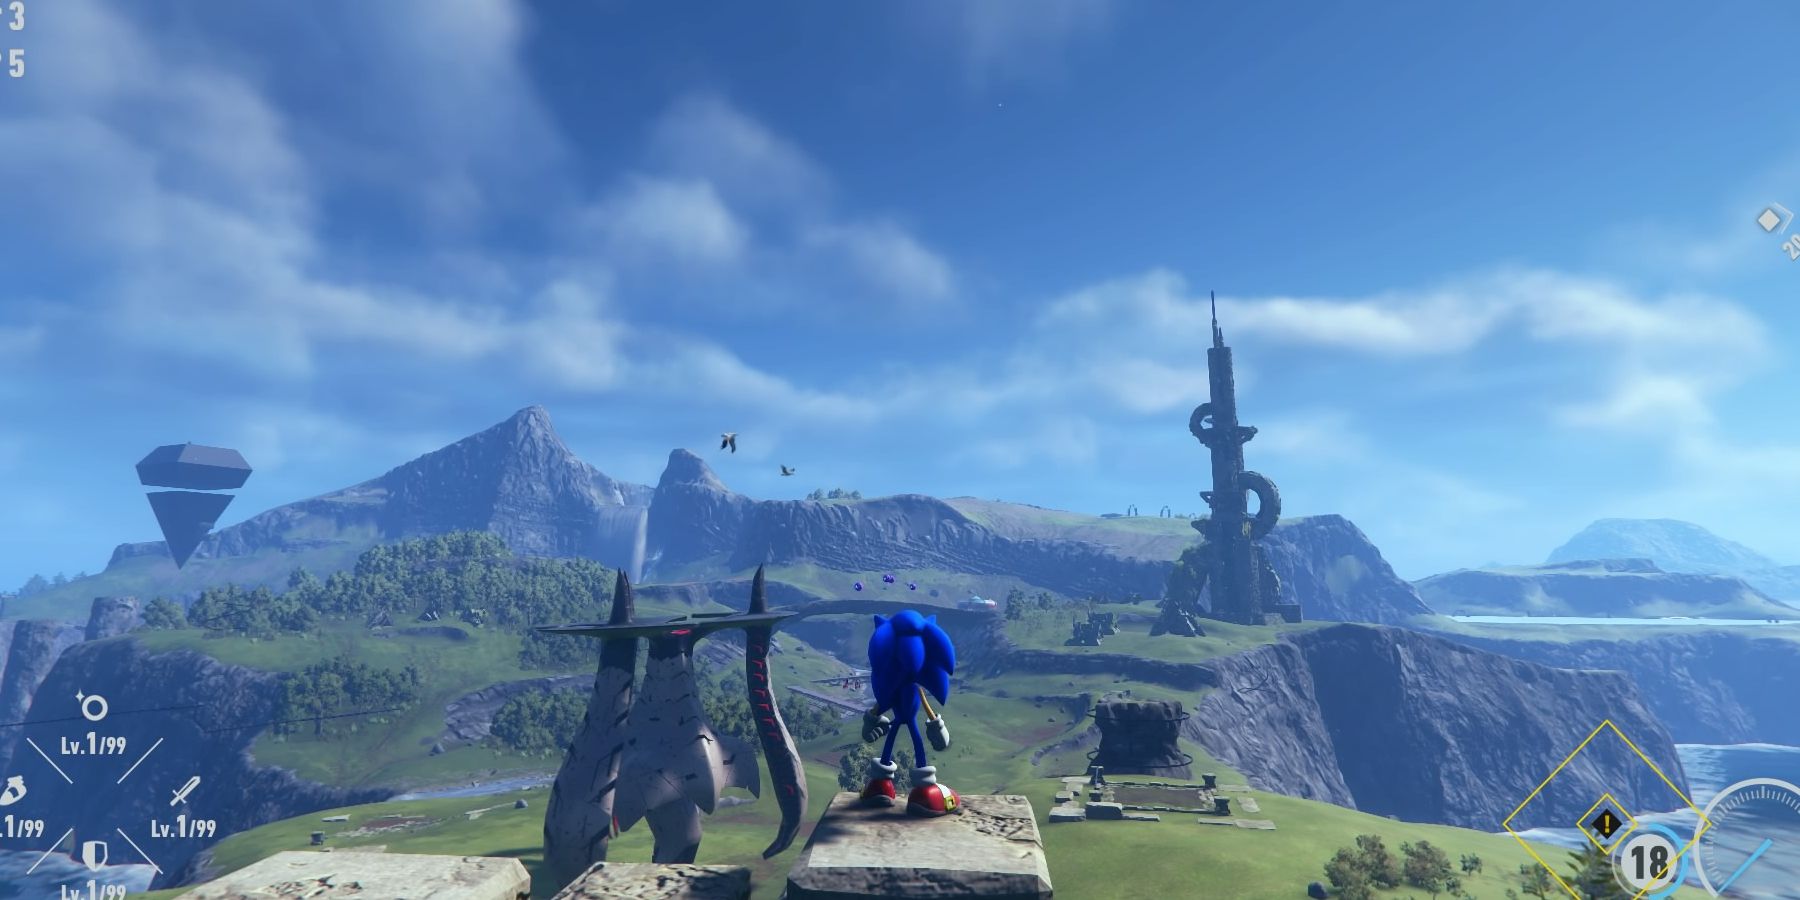 Sonic Frontiers debuts some open-world gameplay and puzzles